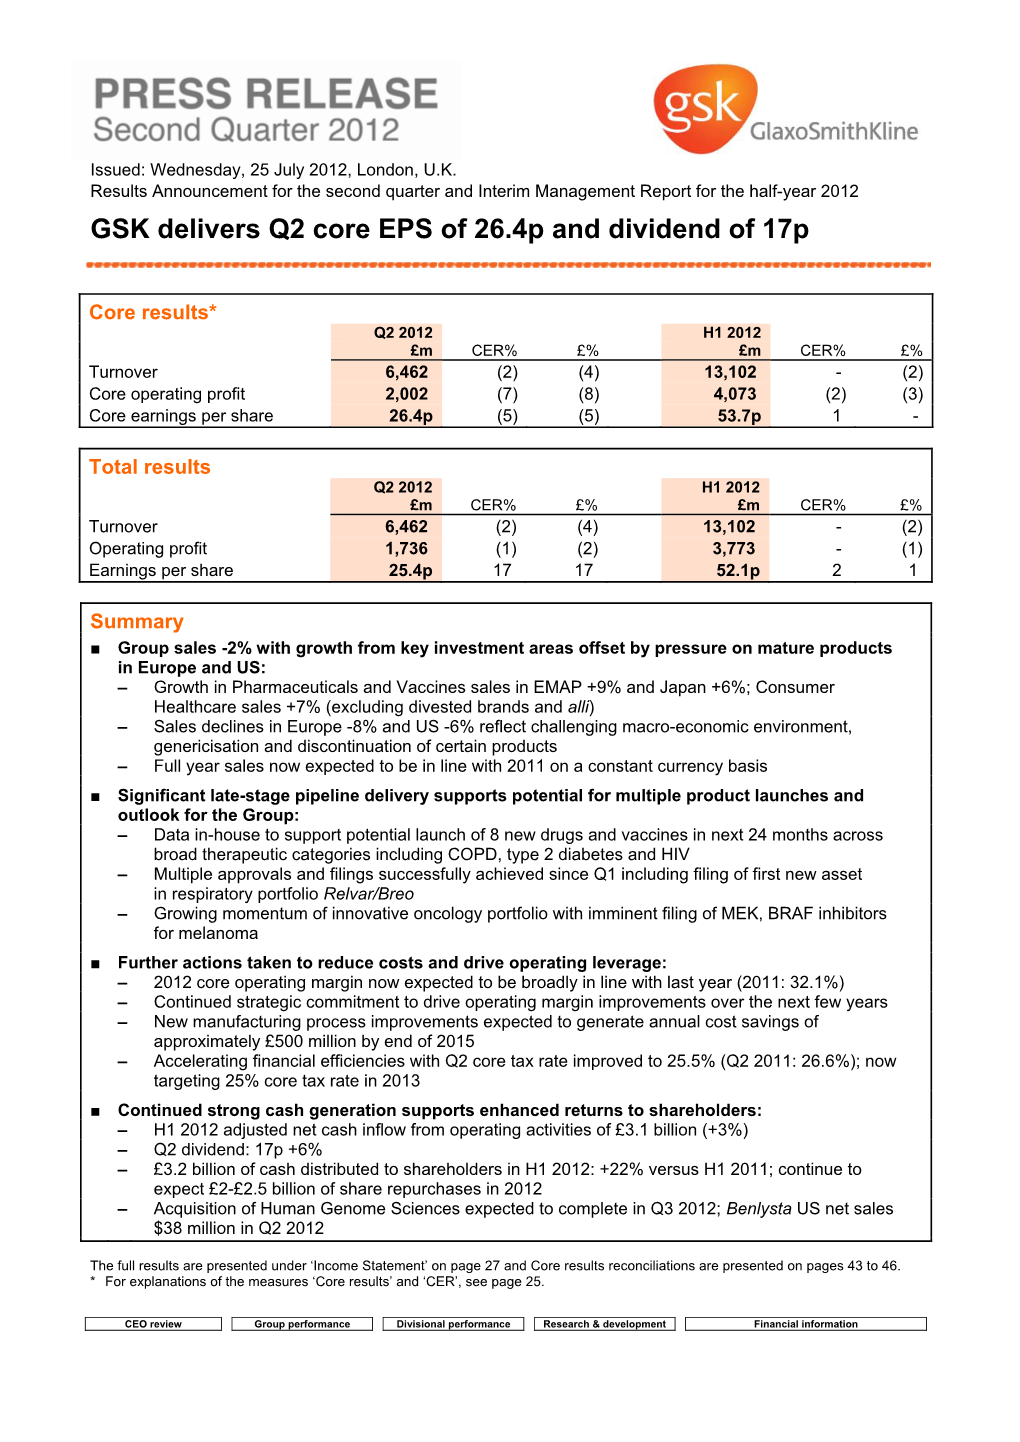 GSK Delivers Q2 Core EPS of 26.4P and Dividend of 17P